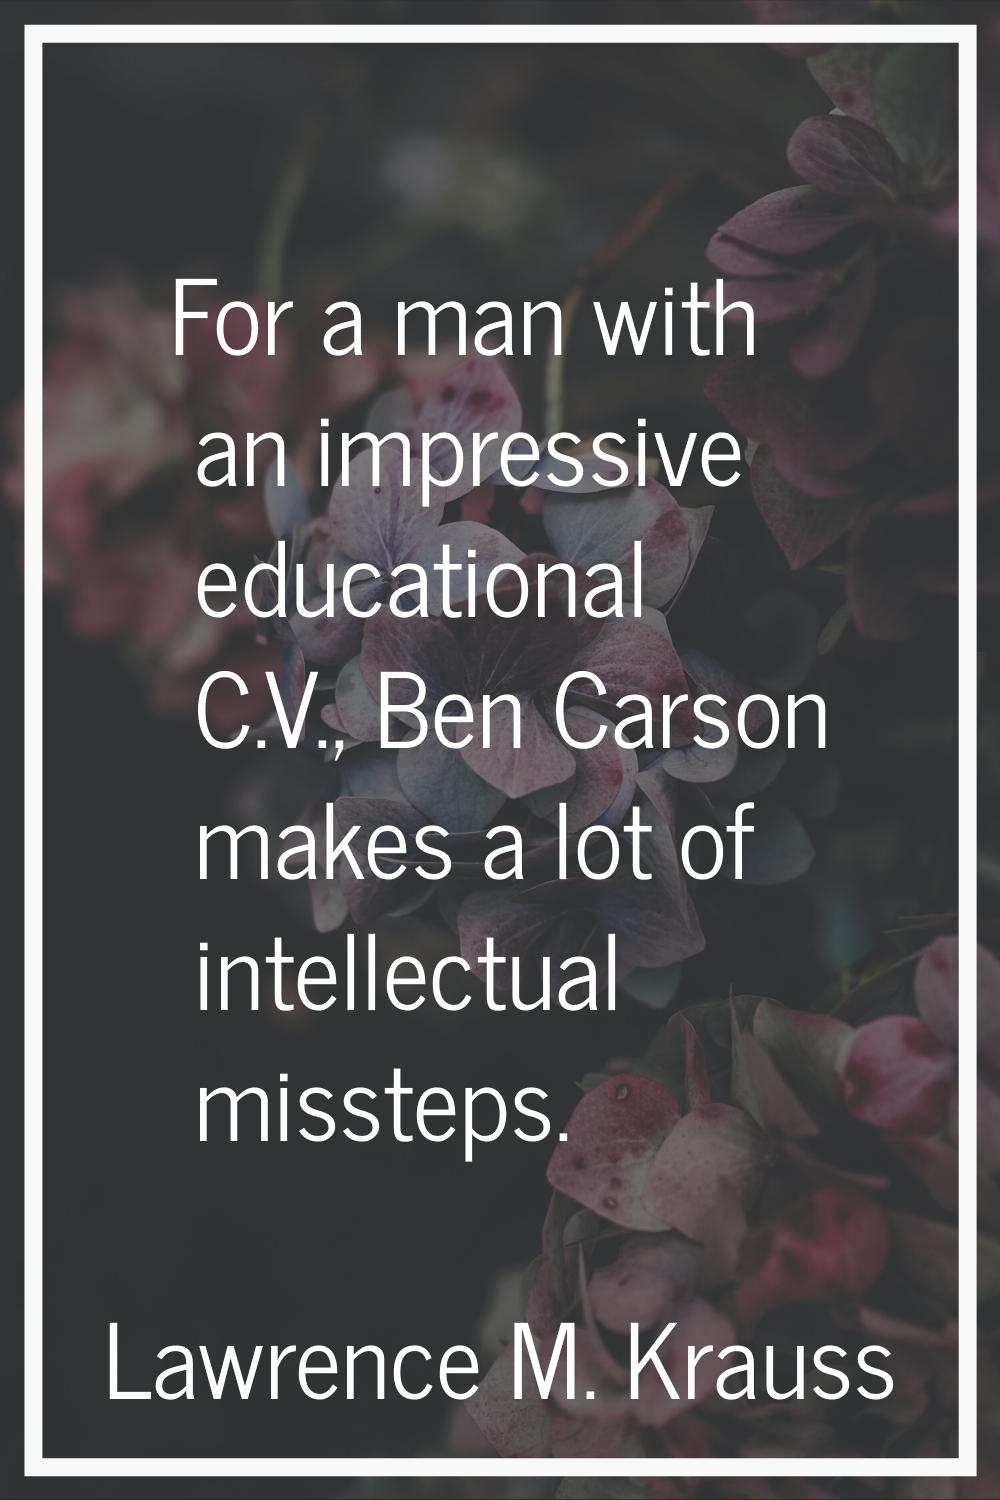 For a man with an impressive educational C.V., Ben Carson makes a lot of intellectual missteps.